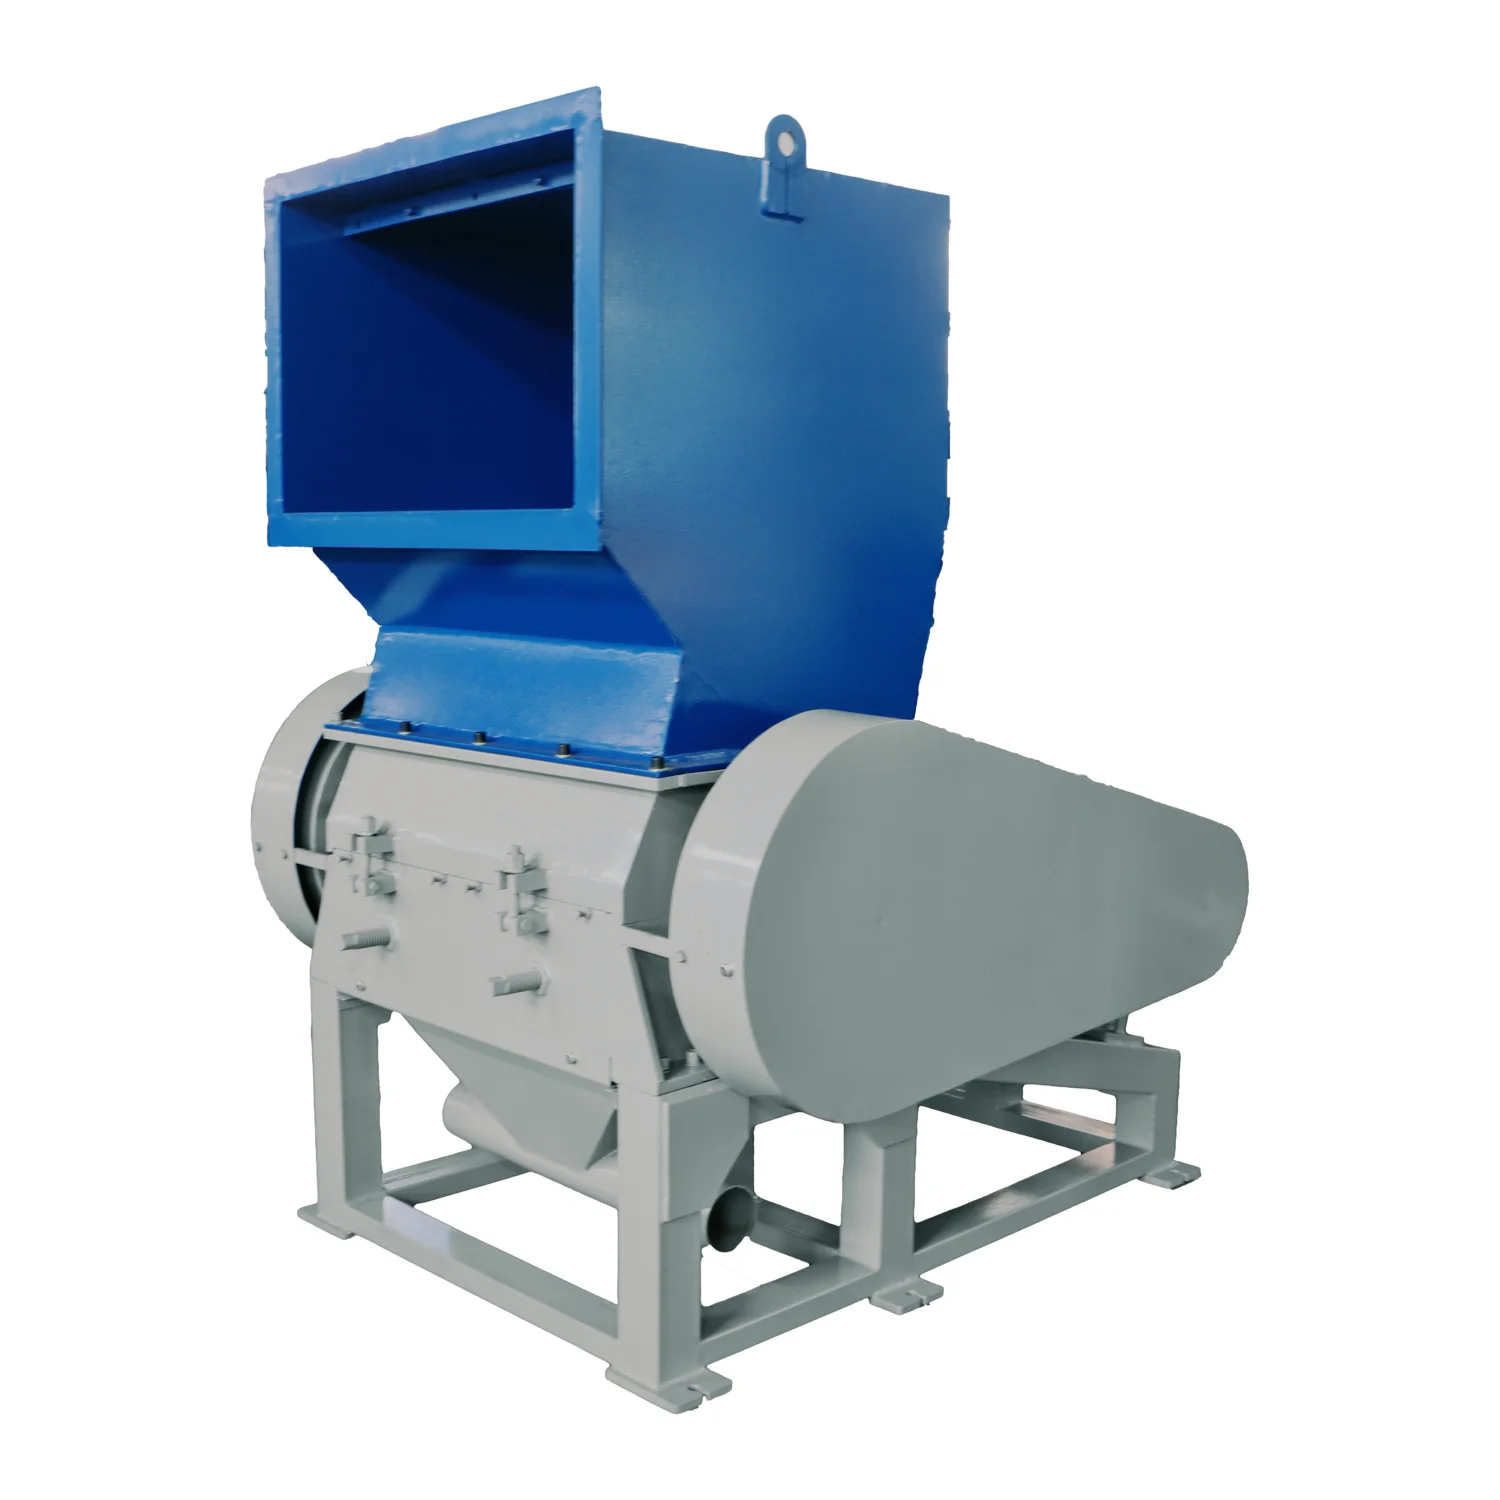 The image showcases an industrial shredder, specifically a granulator or plastic crusher. Here’s a breakdown of its likely purpose and main components: Function: This machine is designed to break down large pieces of plastic or other materials into smaller, more manageable pieces or granules. This facilitates recycling, further processing, or disposal. Components: Hopper: The blue, box-shaped component at the top serves as the input point where the material to be shredded is fed. Cutting Chamber: Inside the machine, there is a cutting chamber with rotating blades or knives that shred the material. Motor: An electric motor (not visible in the image) drives the rotating blades, providing the power for the shredding process. Discharge Chute: Shredded material exits the machine through the discharge chute, typically located at the bottom or side. Frame & Base: The sturdy frame and base support the components and provide stability during operation. Potential Applications: Plastic Recycling: Shredding plastic waste for further processing and recycling. Manufacturing: Size reduction of plastic or rubber materials for use in production processes. Waste Management: Reducing the volume of waste materials for easier disposal. Other Industries: Shredding various materials like wood, paper, or certain metals, depending on the design and capabilities of the specific machine.